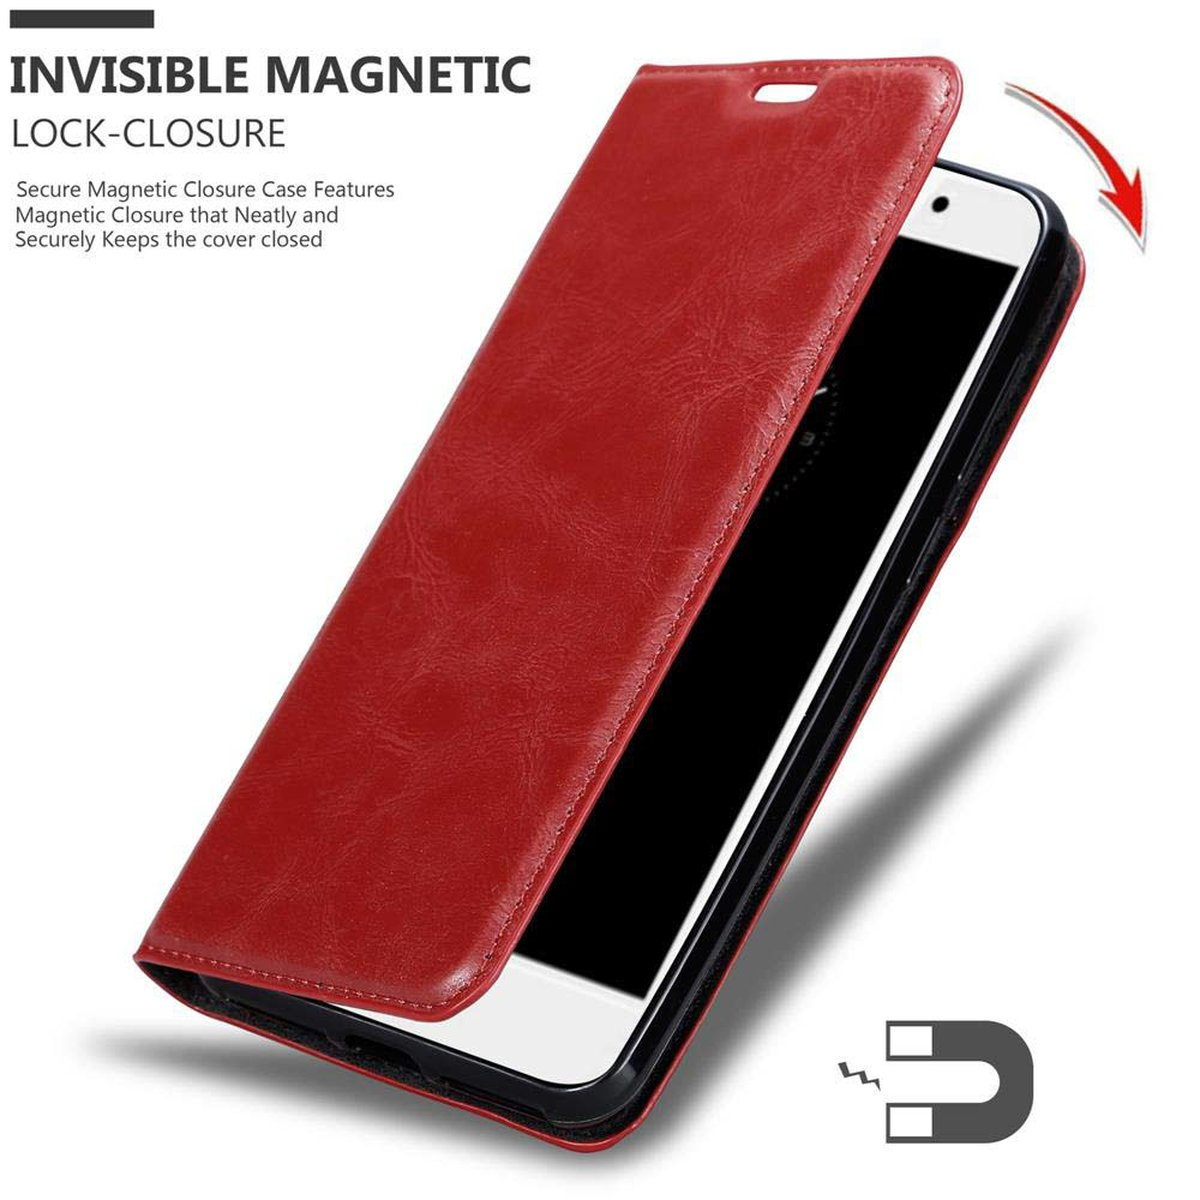 Bookcover, Enjoy ROT Magnet, Book Huawei, Hülle Invisible CADORABO 7 APFEL PLUS,